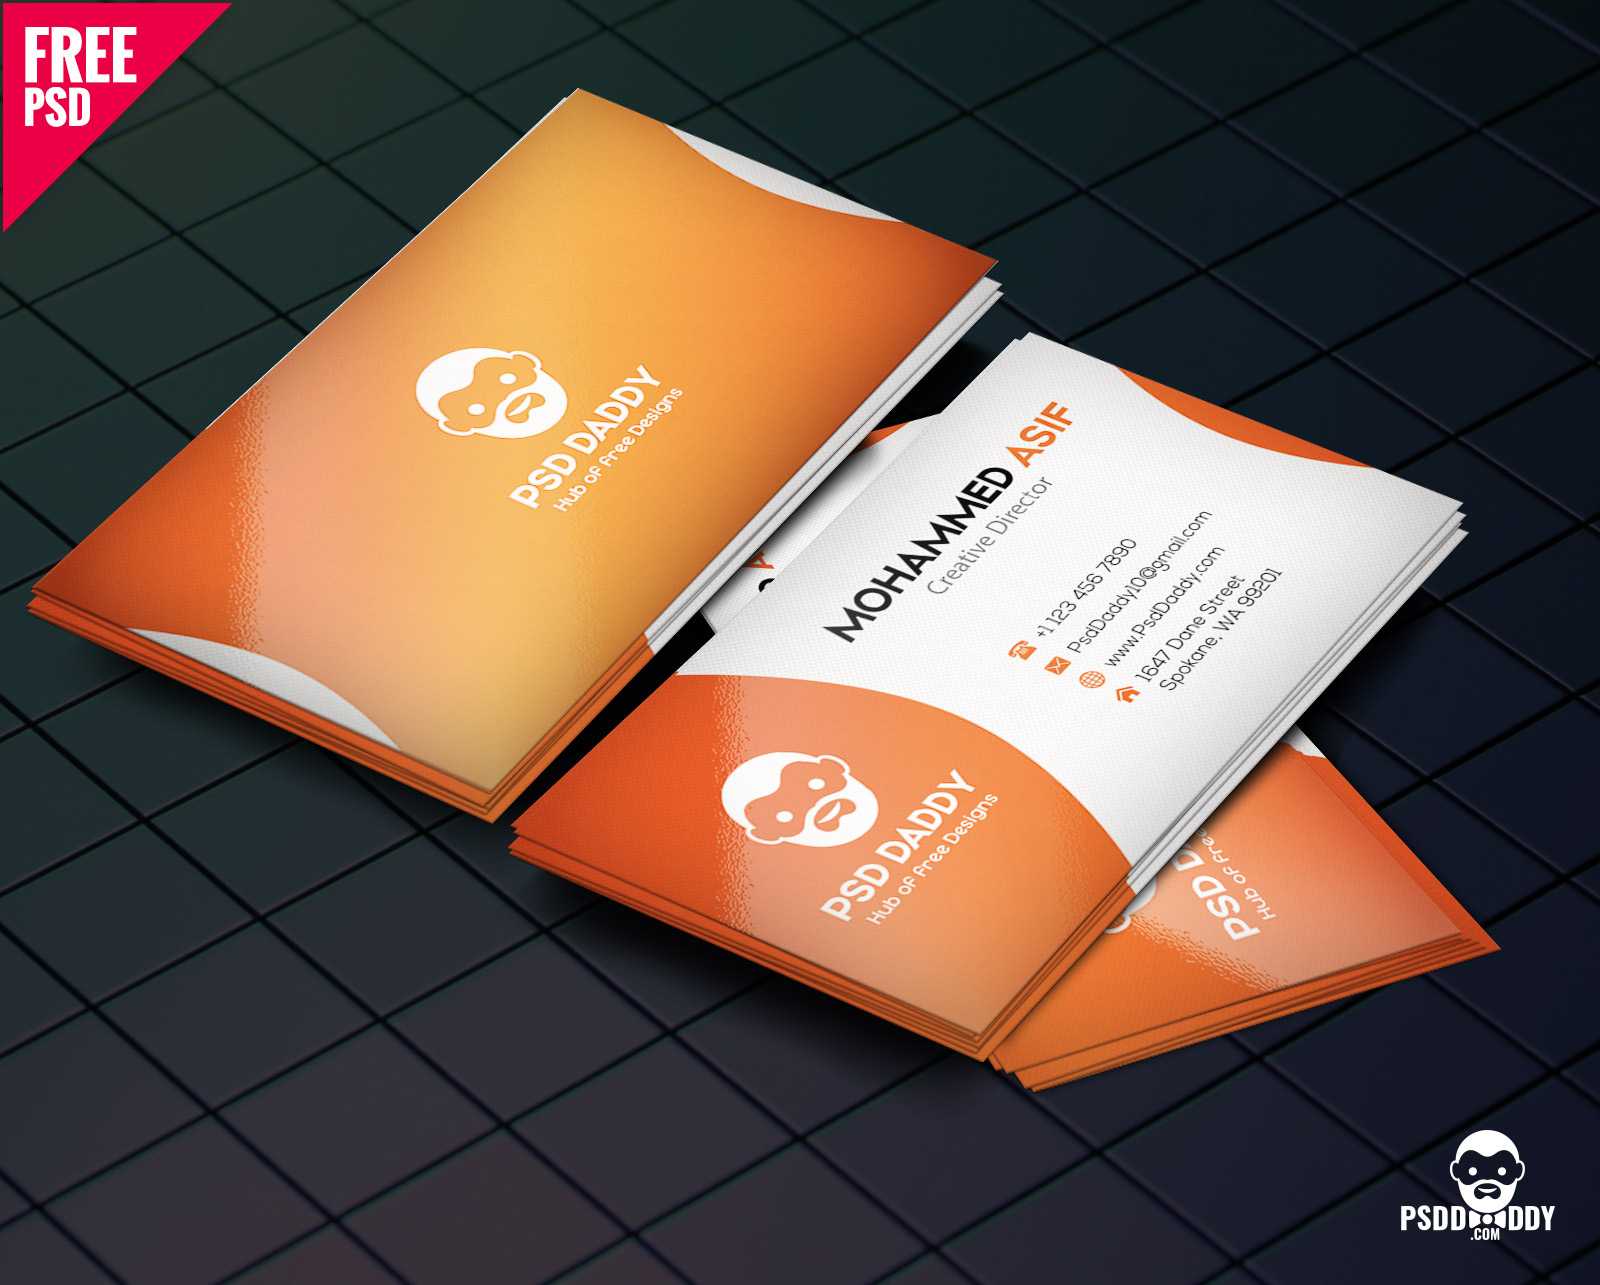 Download] Business Card Design Psd Free | Psddaddy Pertaining To Visiting Card Psd Template Free Download